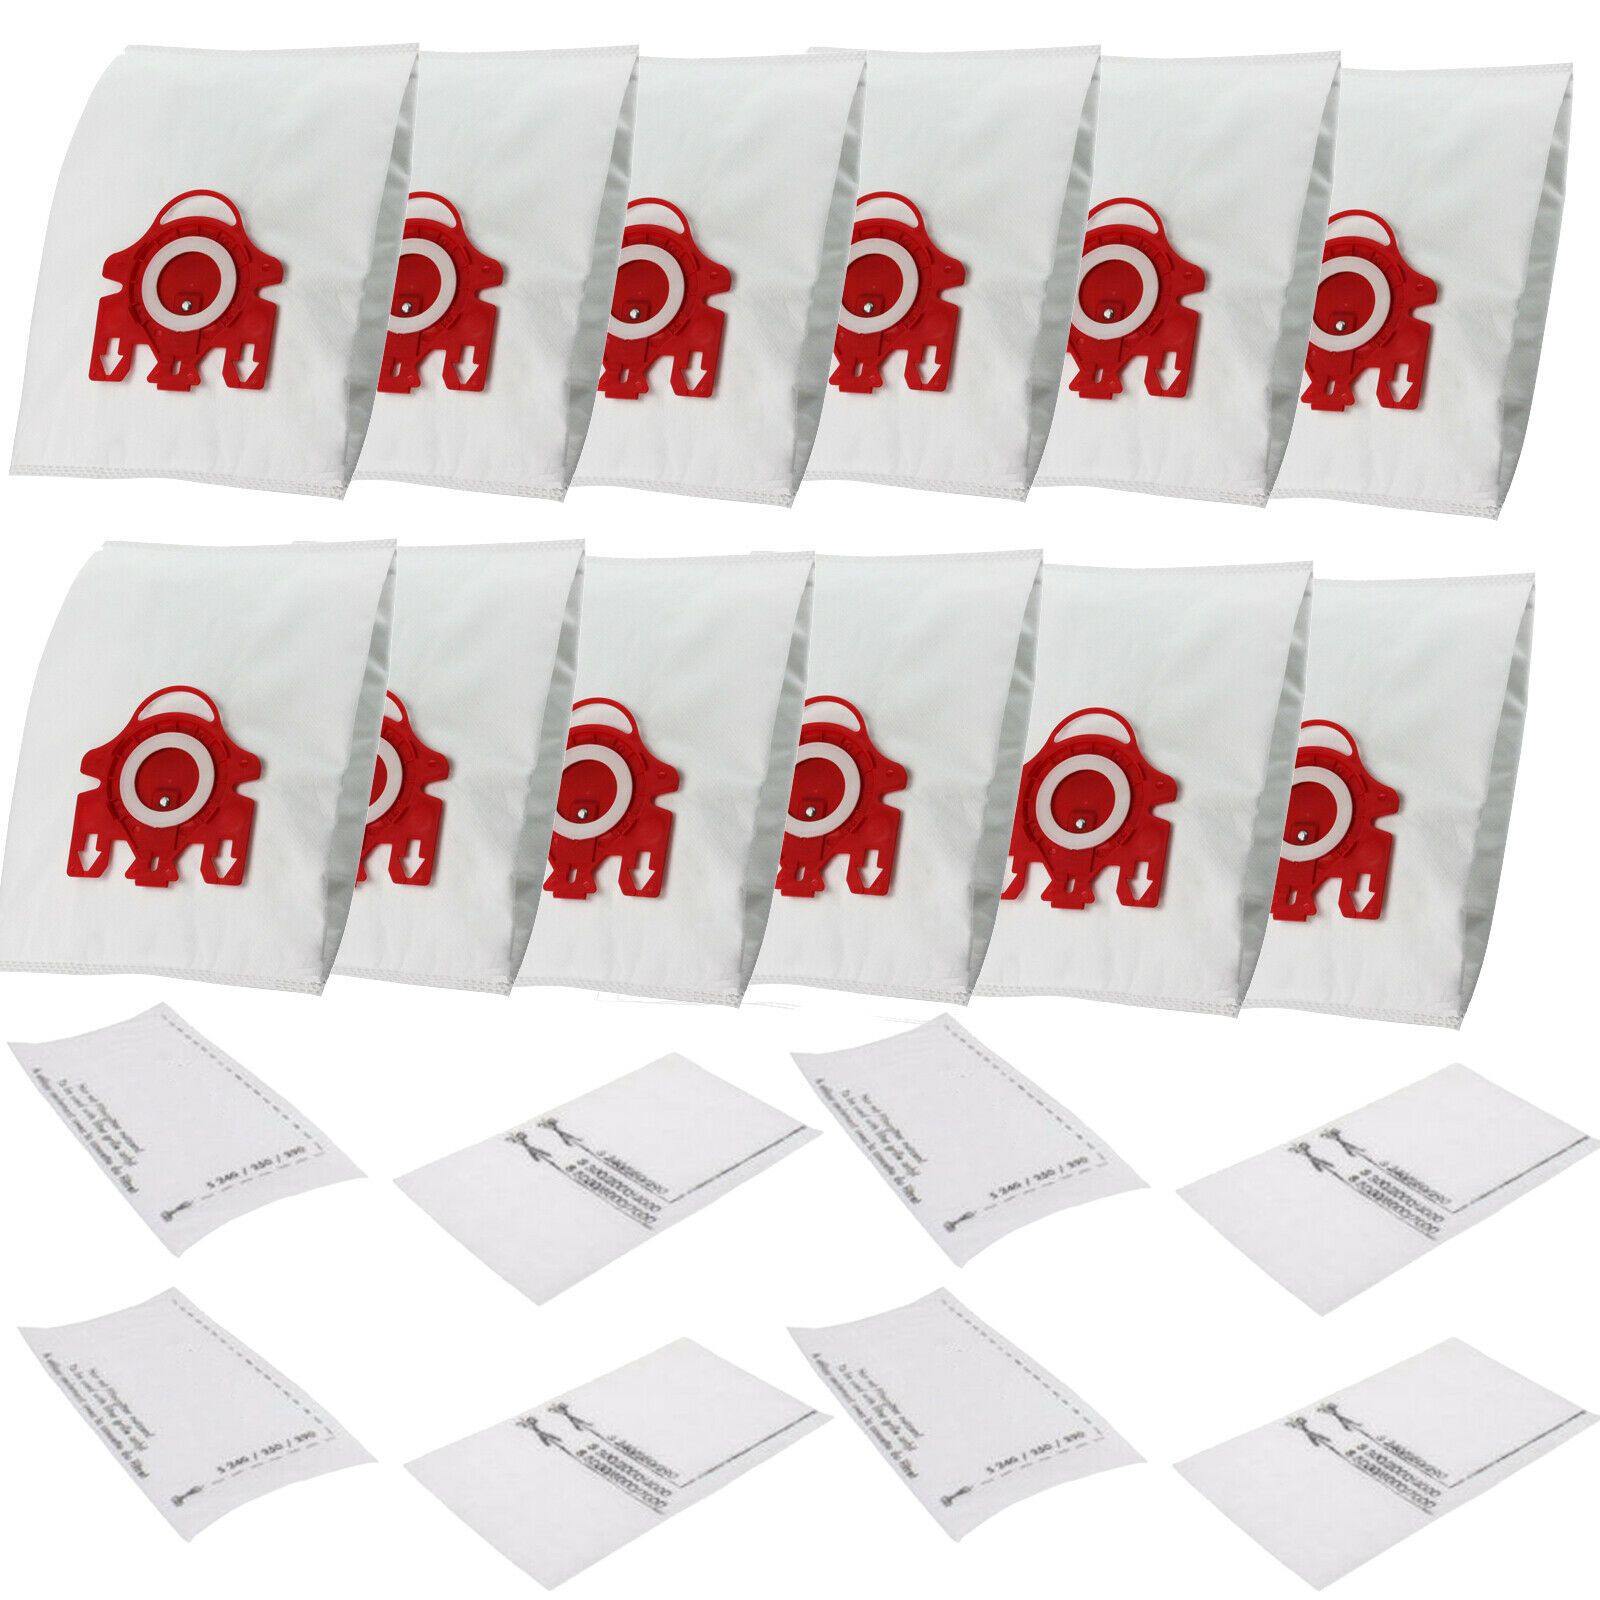 12 Vacuum Cleaner Bags & 8 Filters For Miele S344 S381 S381i S386 S4210 Comfort Sparesbarn